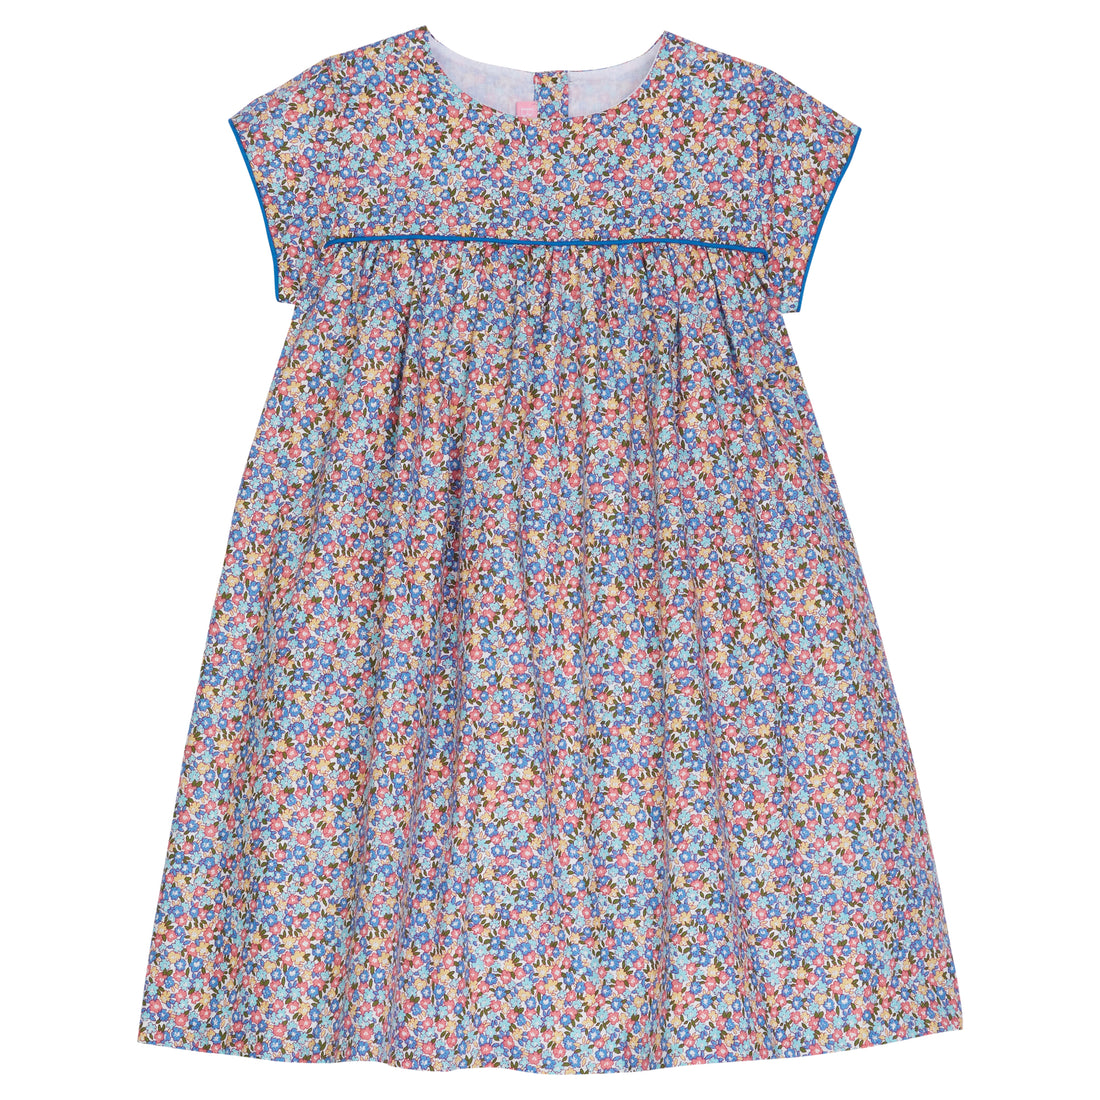 Our Charlotte dress in Devon Floral Blue details a beautiful mix of red, yellow., and blue flowers. There is a solid blue trim around the arms and across bust adding a more structured look--BISBY girl